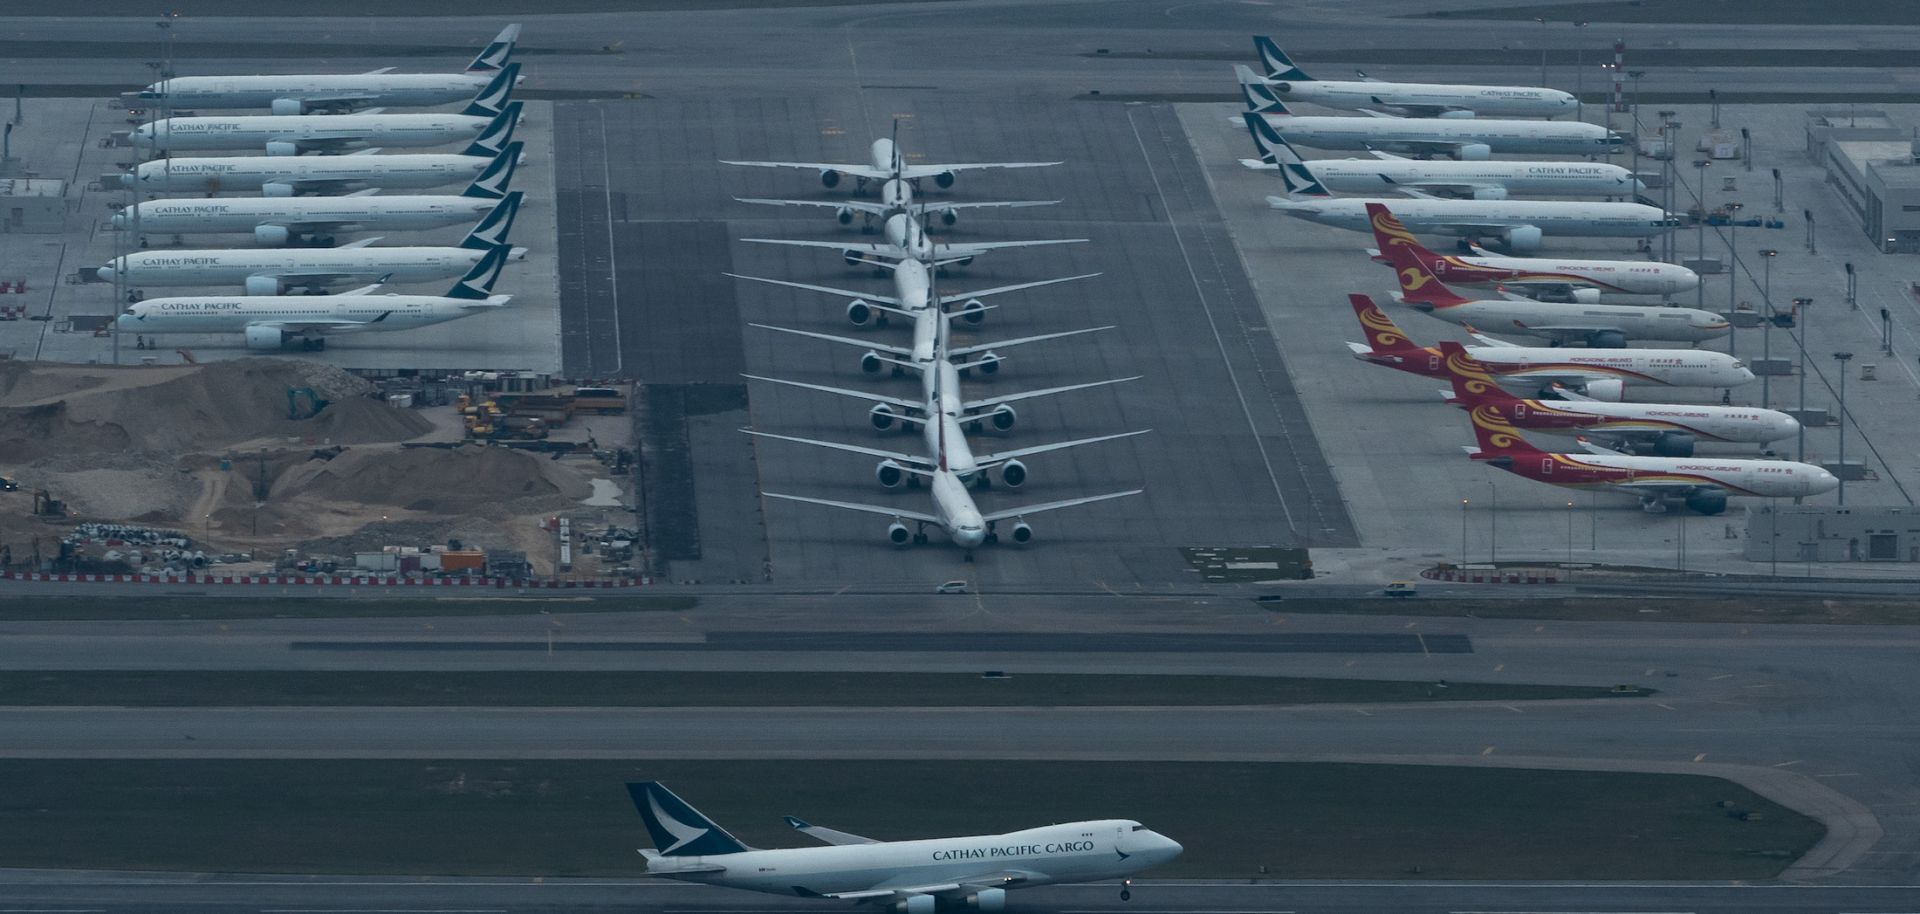 A Cathay Pacific aircraft takes off on a runway as others park at Hong Kong International Airport on March 6, 2020.